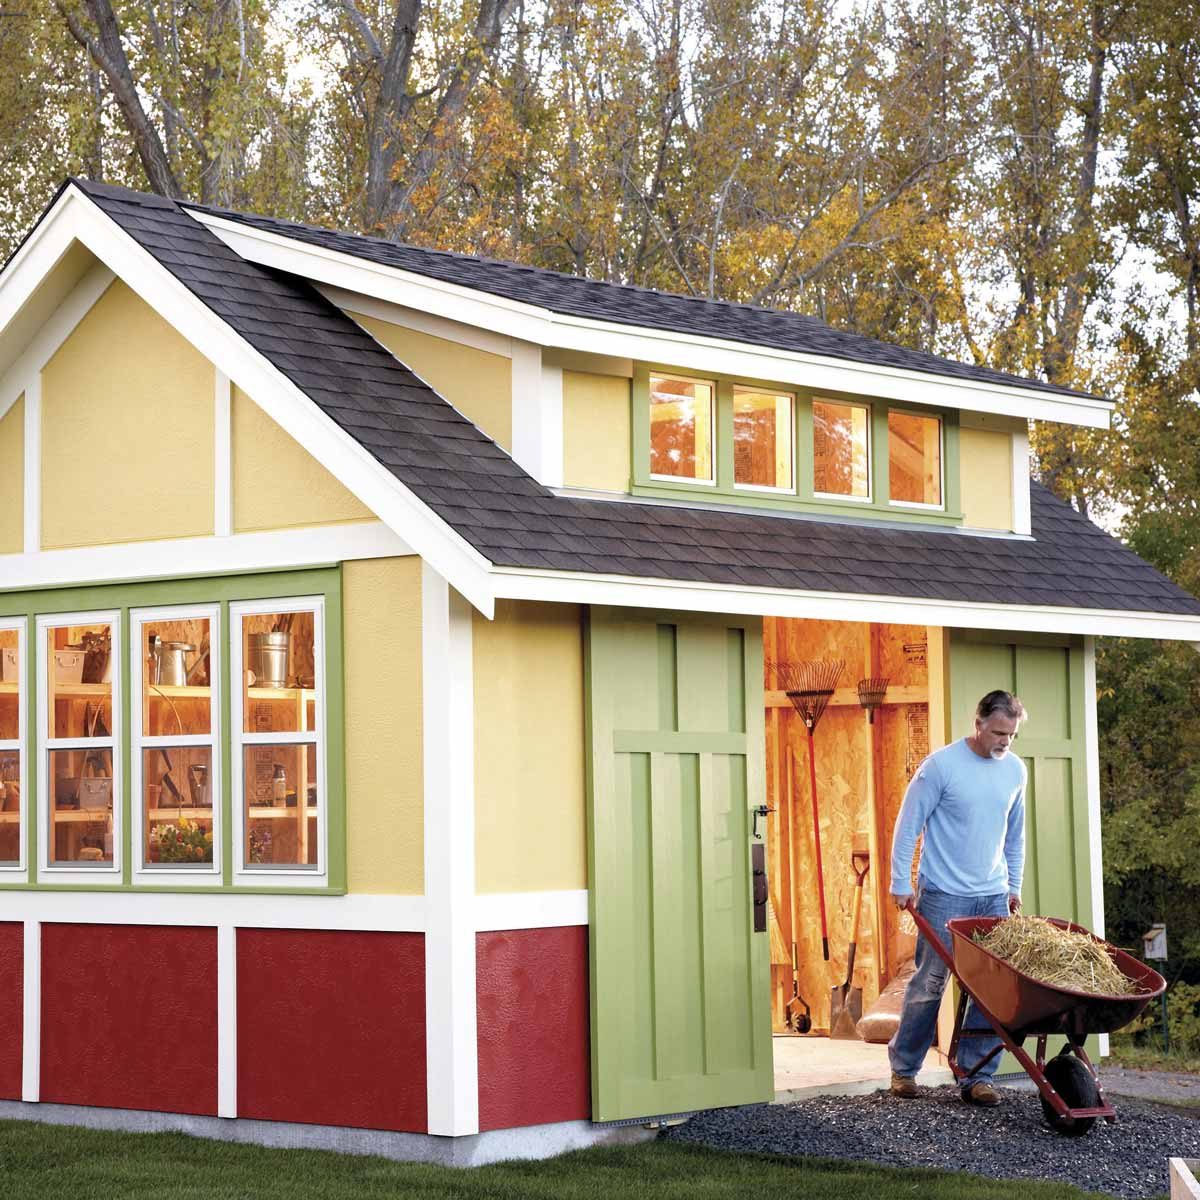 How to Build a Shed: 2011 Garden Shed